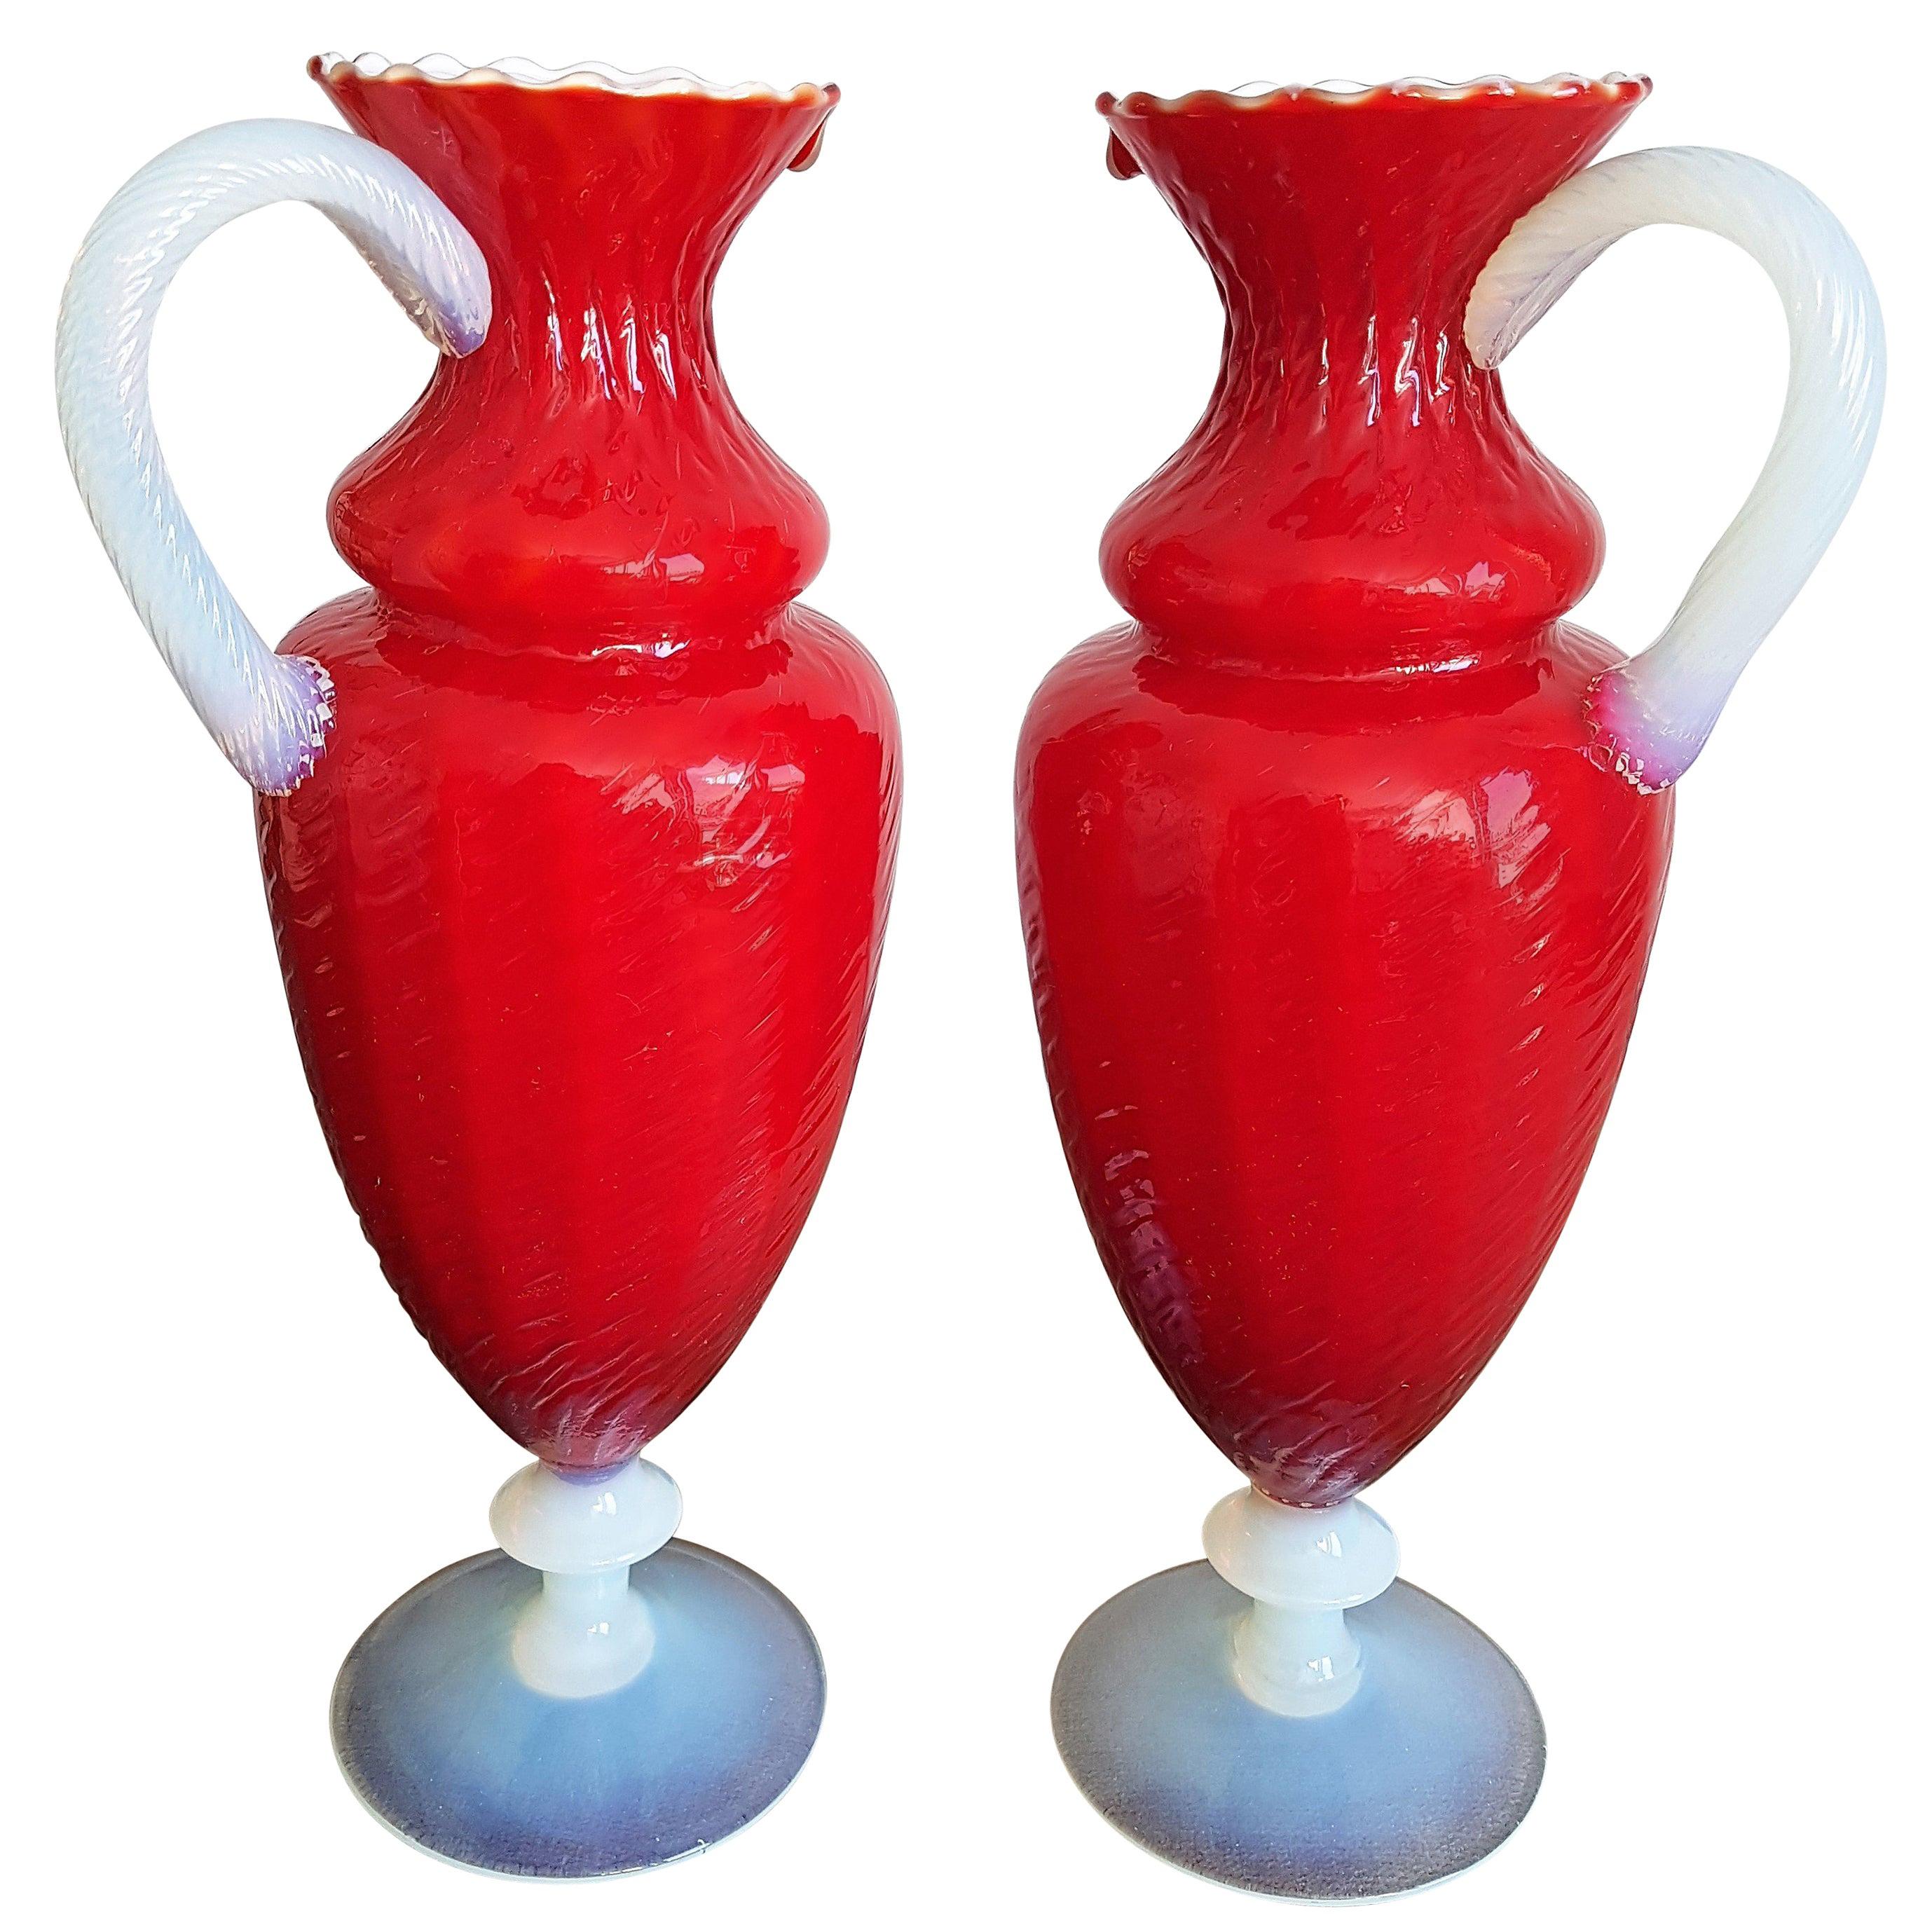 Pair of Napoleon III Red and White Opaline Vases Pitchers, France, 19th Century